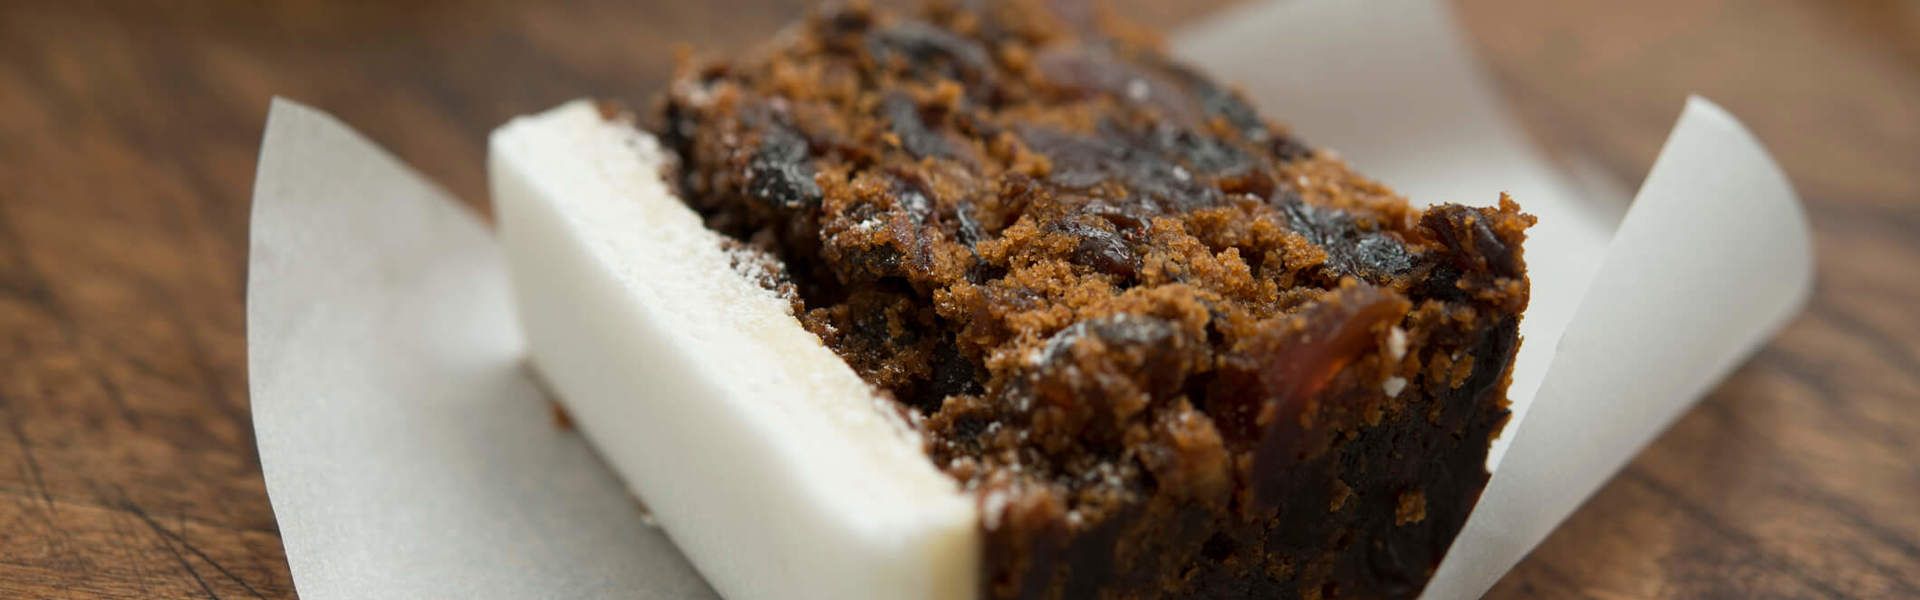 a slice of Christmas cake on a piece of white baking paper